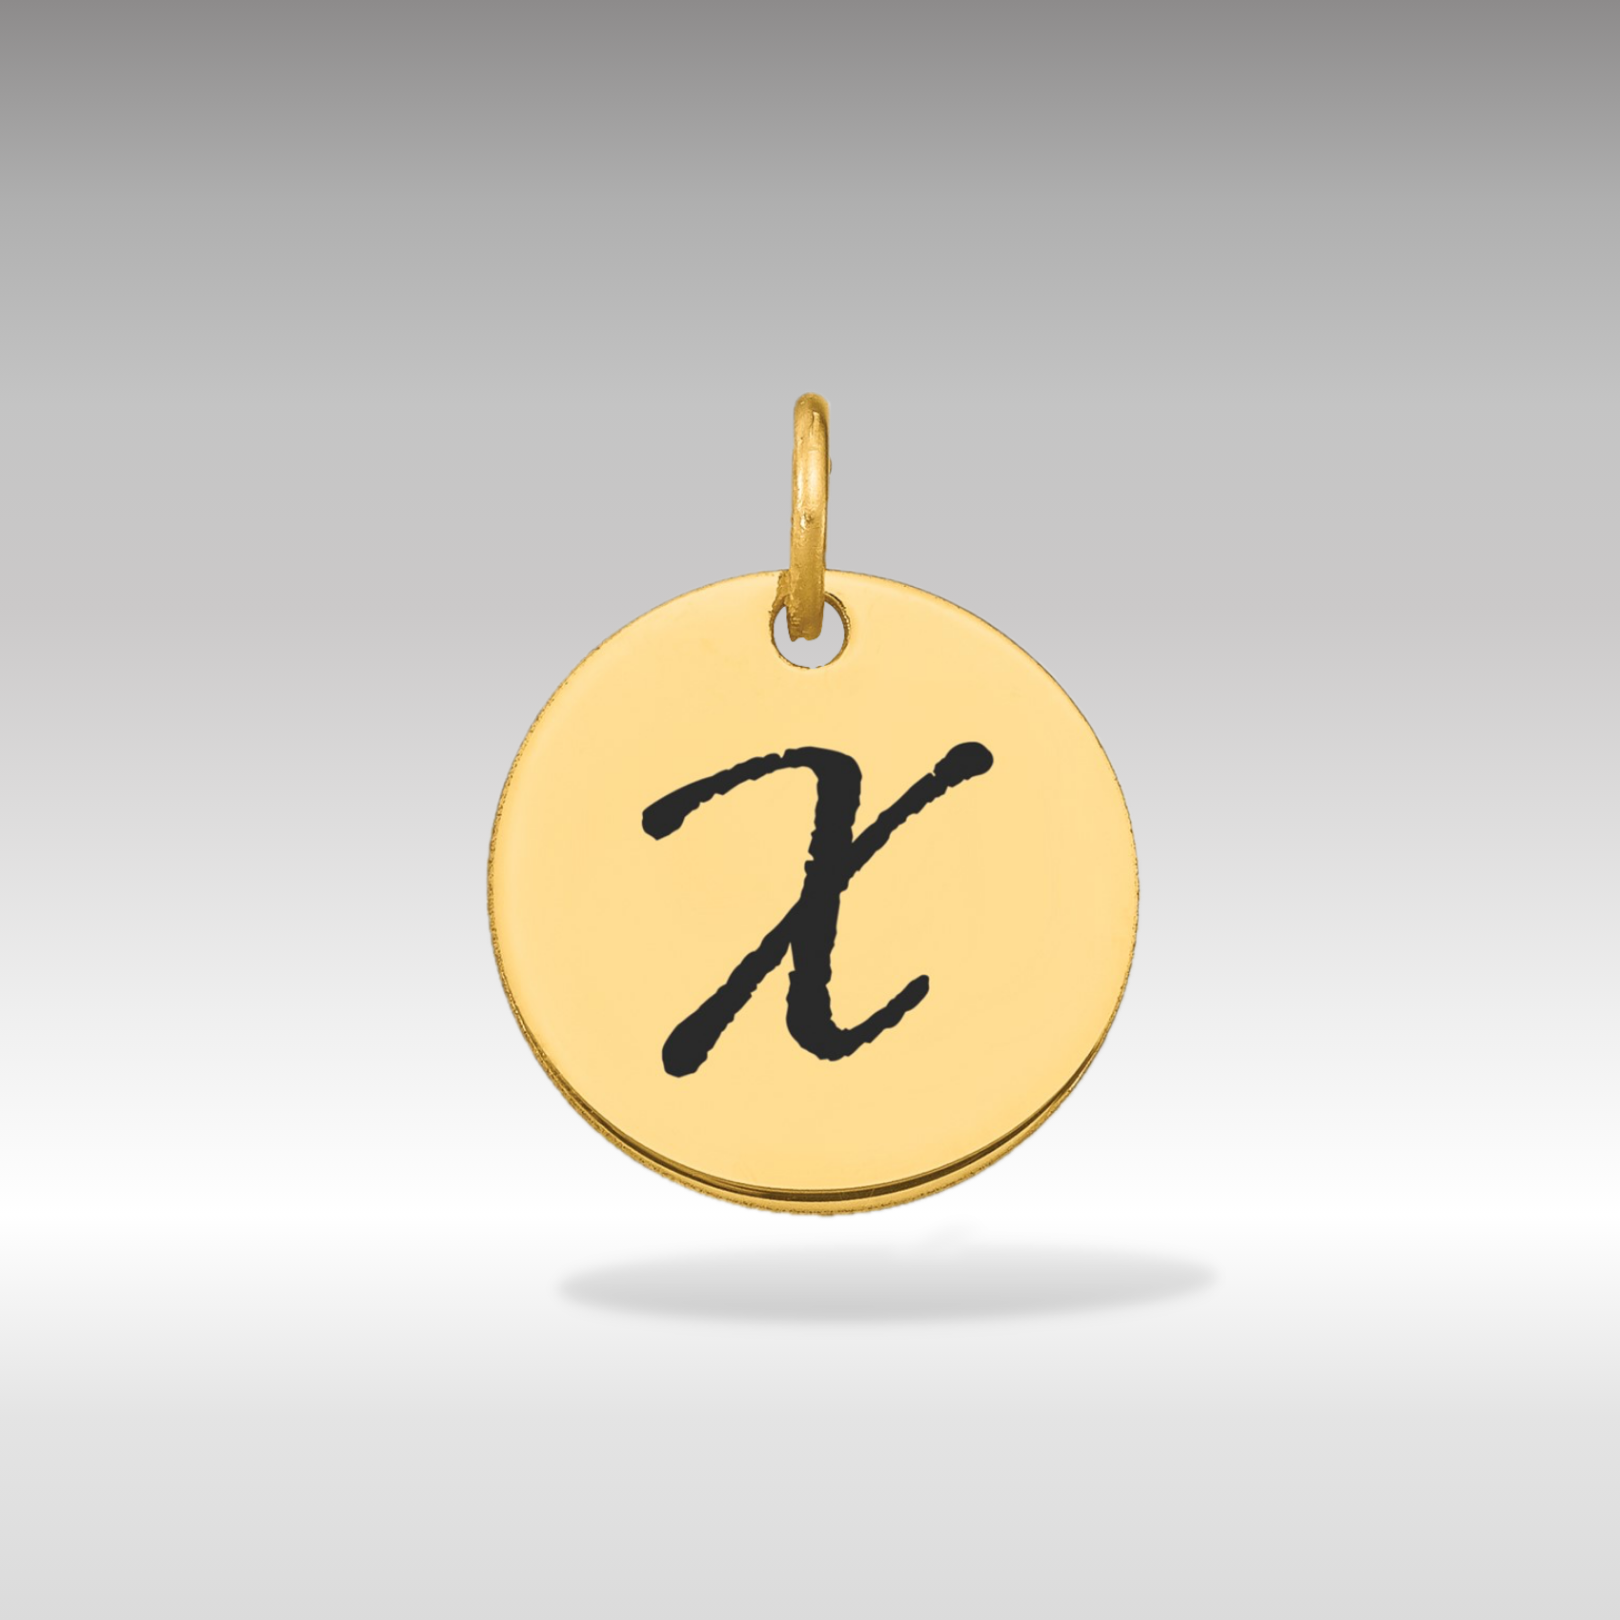 14K Gold Script Letter 'X' Circular Charm with Black Enamel - Charlie & Co. Jewelry